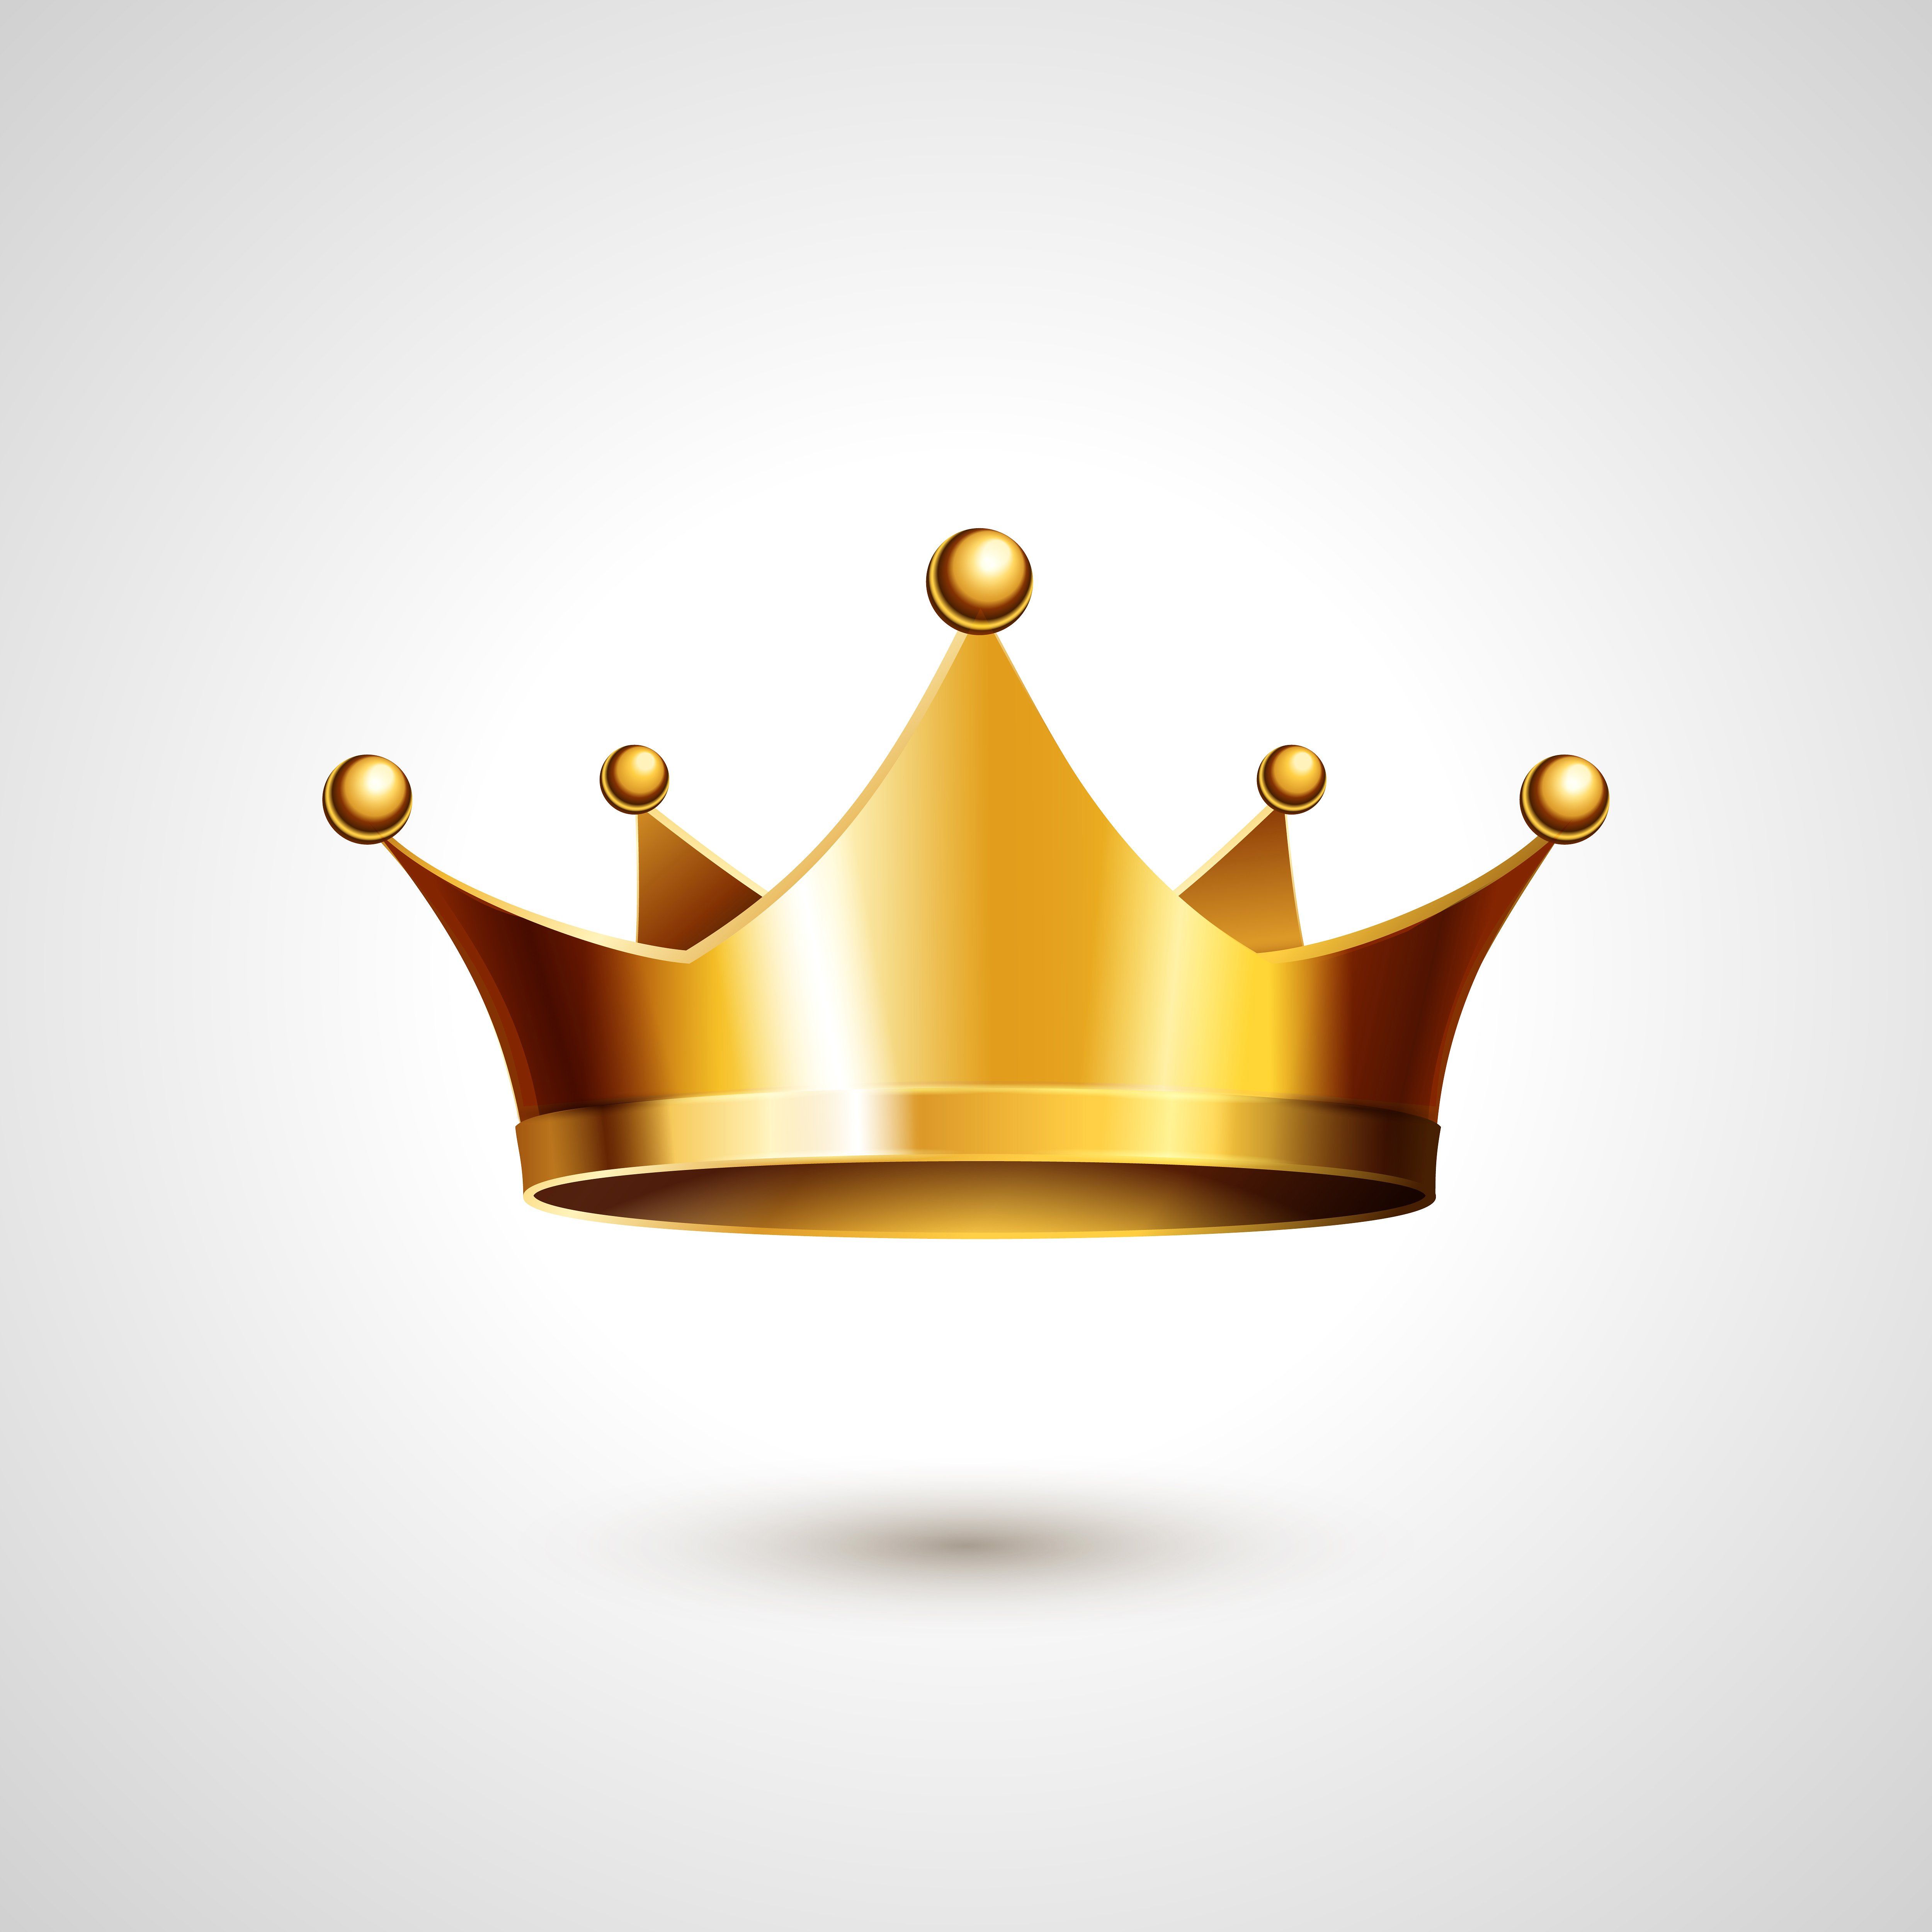 Gold crown icon. Crown drawing, Crown illustration, Crown art